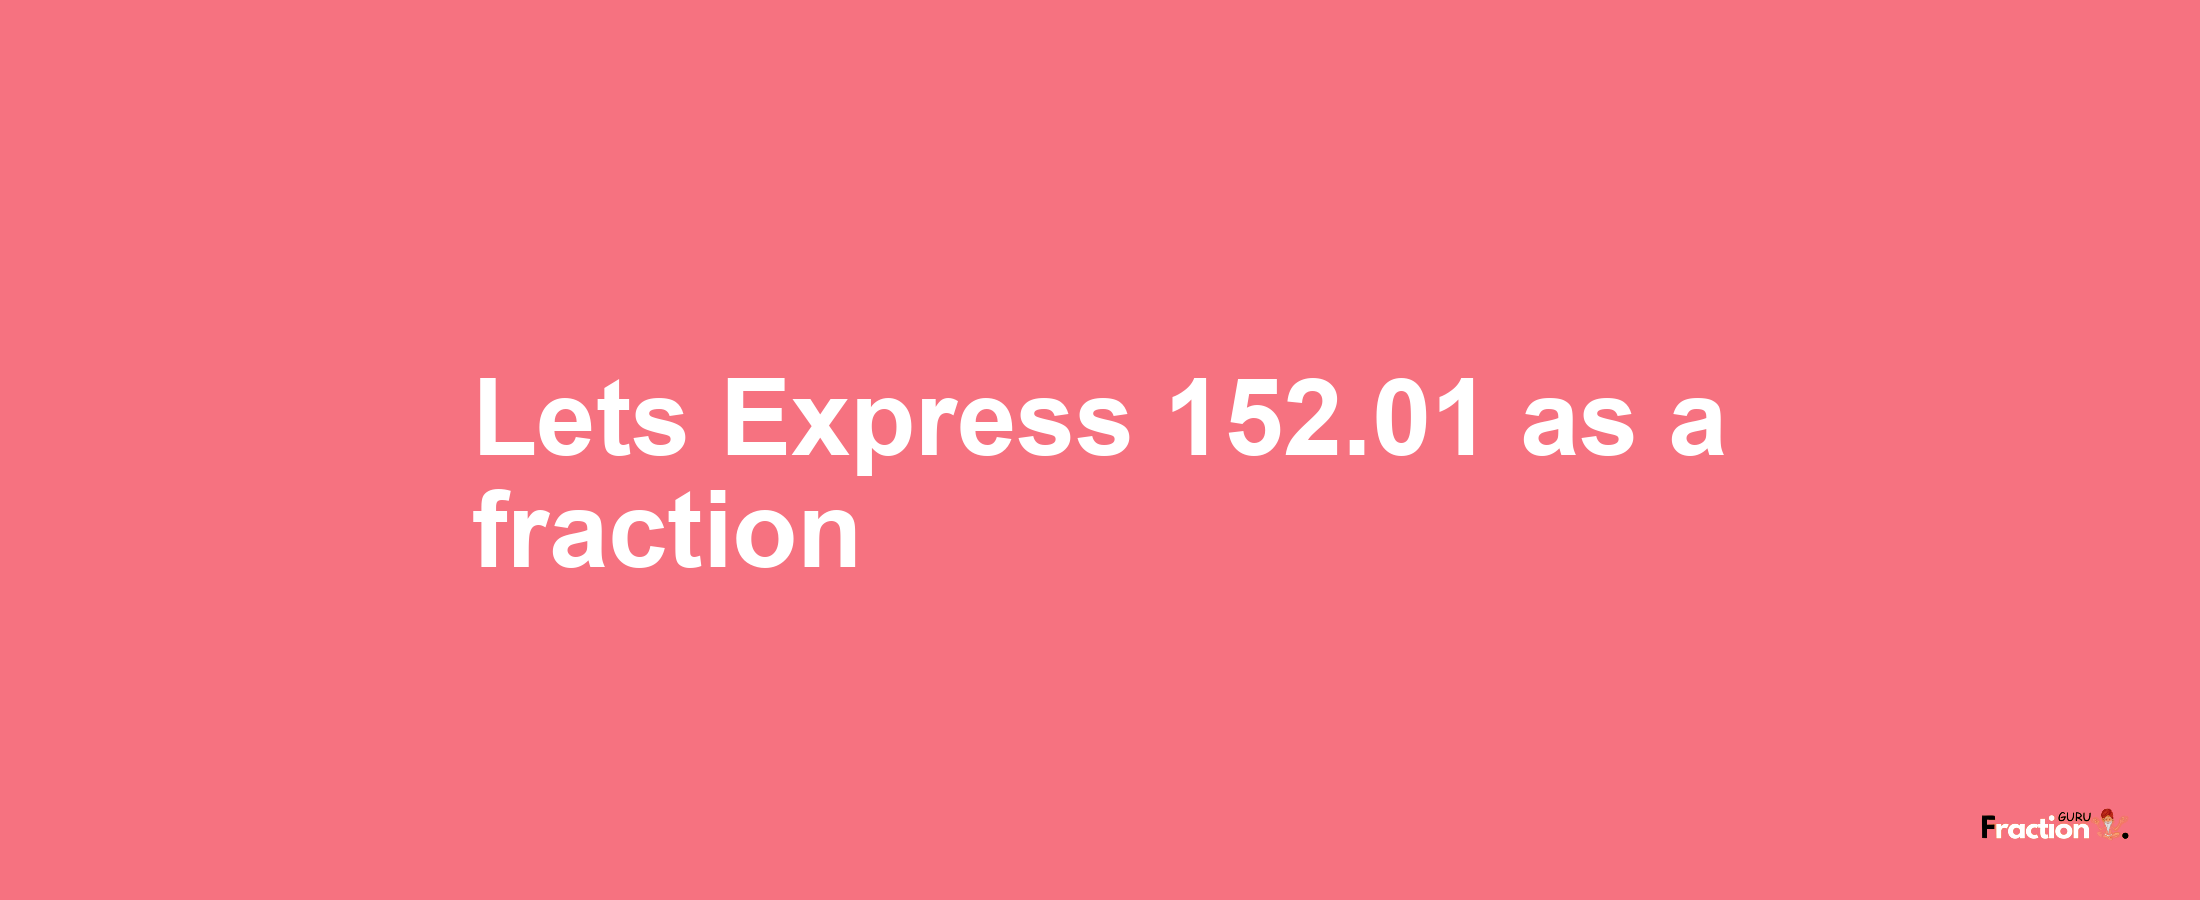 Lets Express 152.01 as afraction